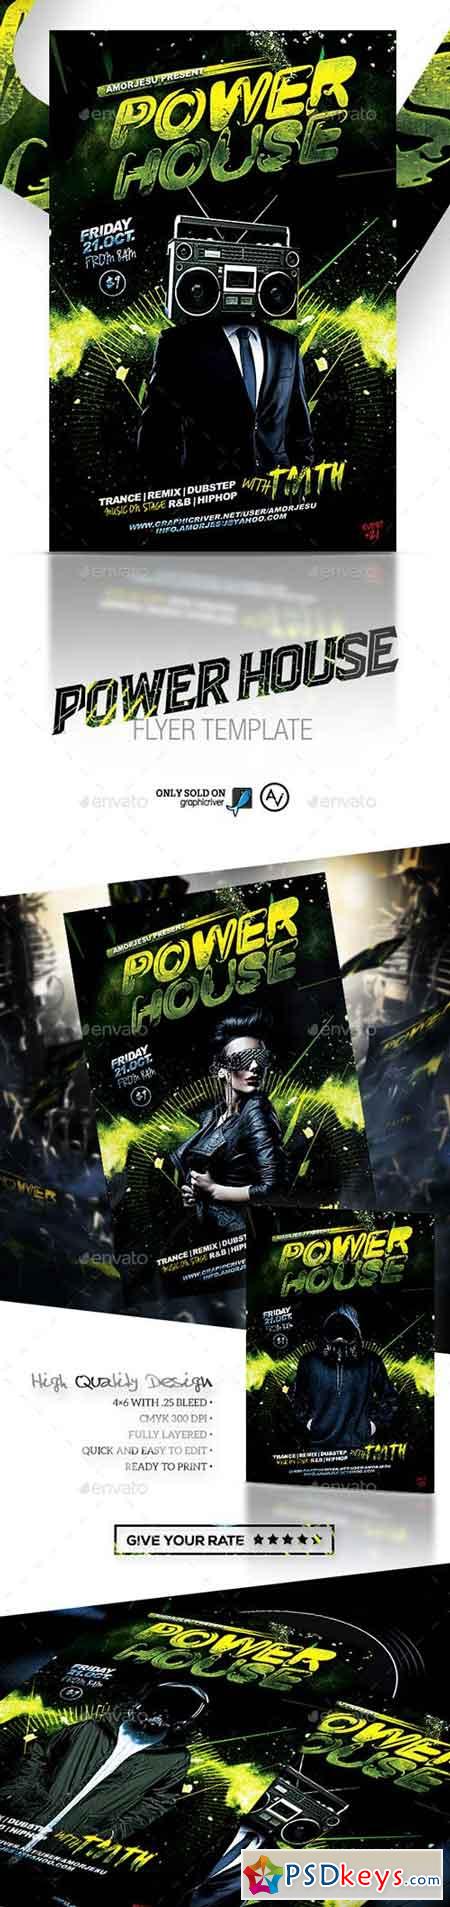 Power House Flyer Template 15672358